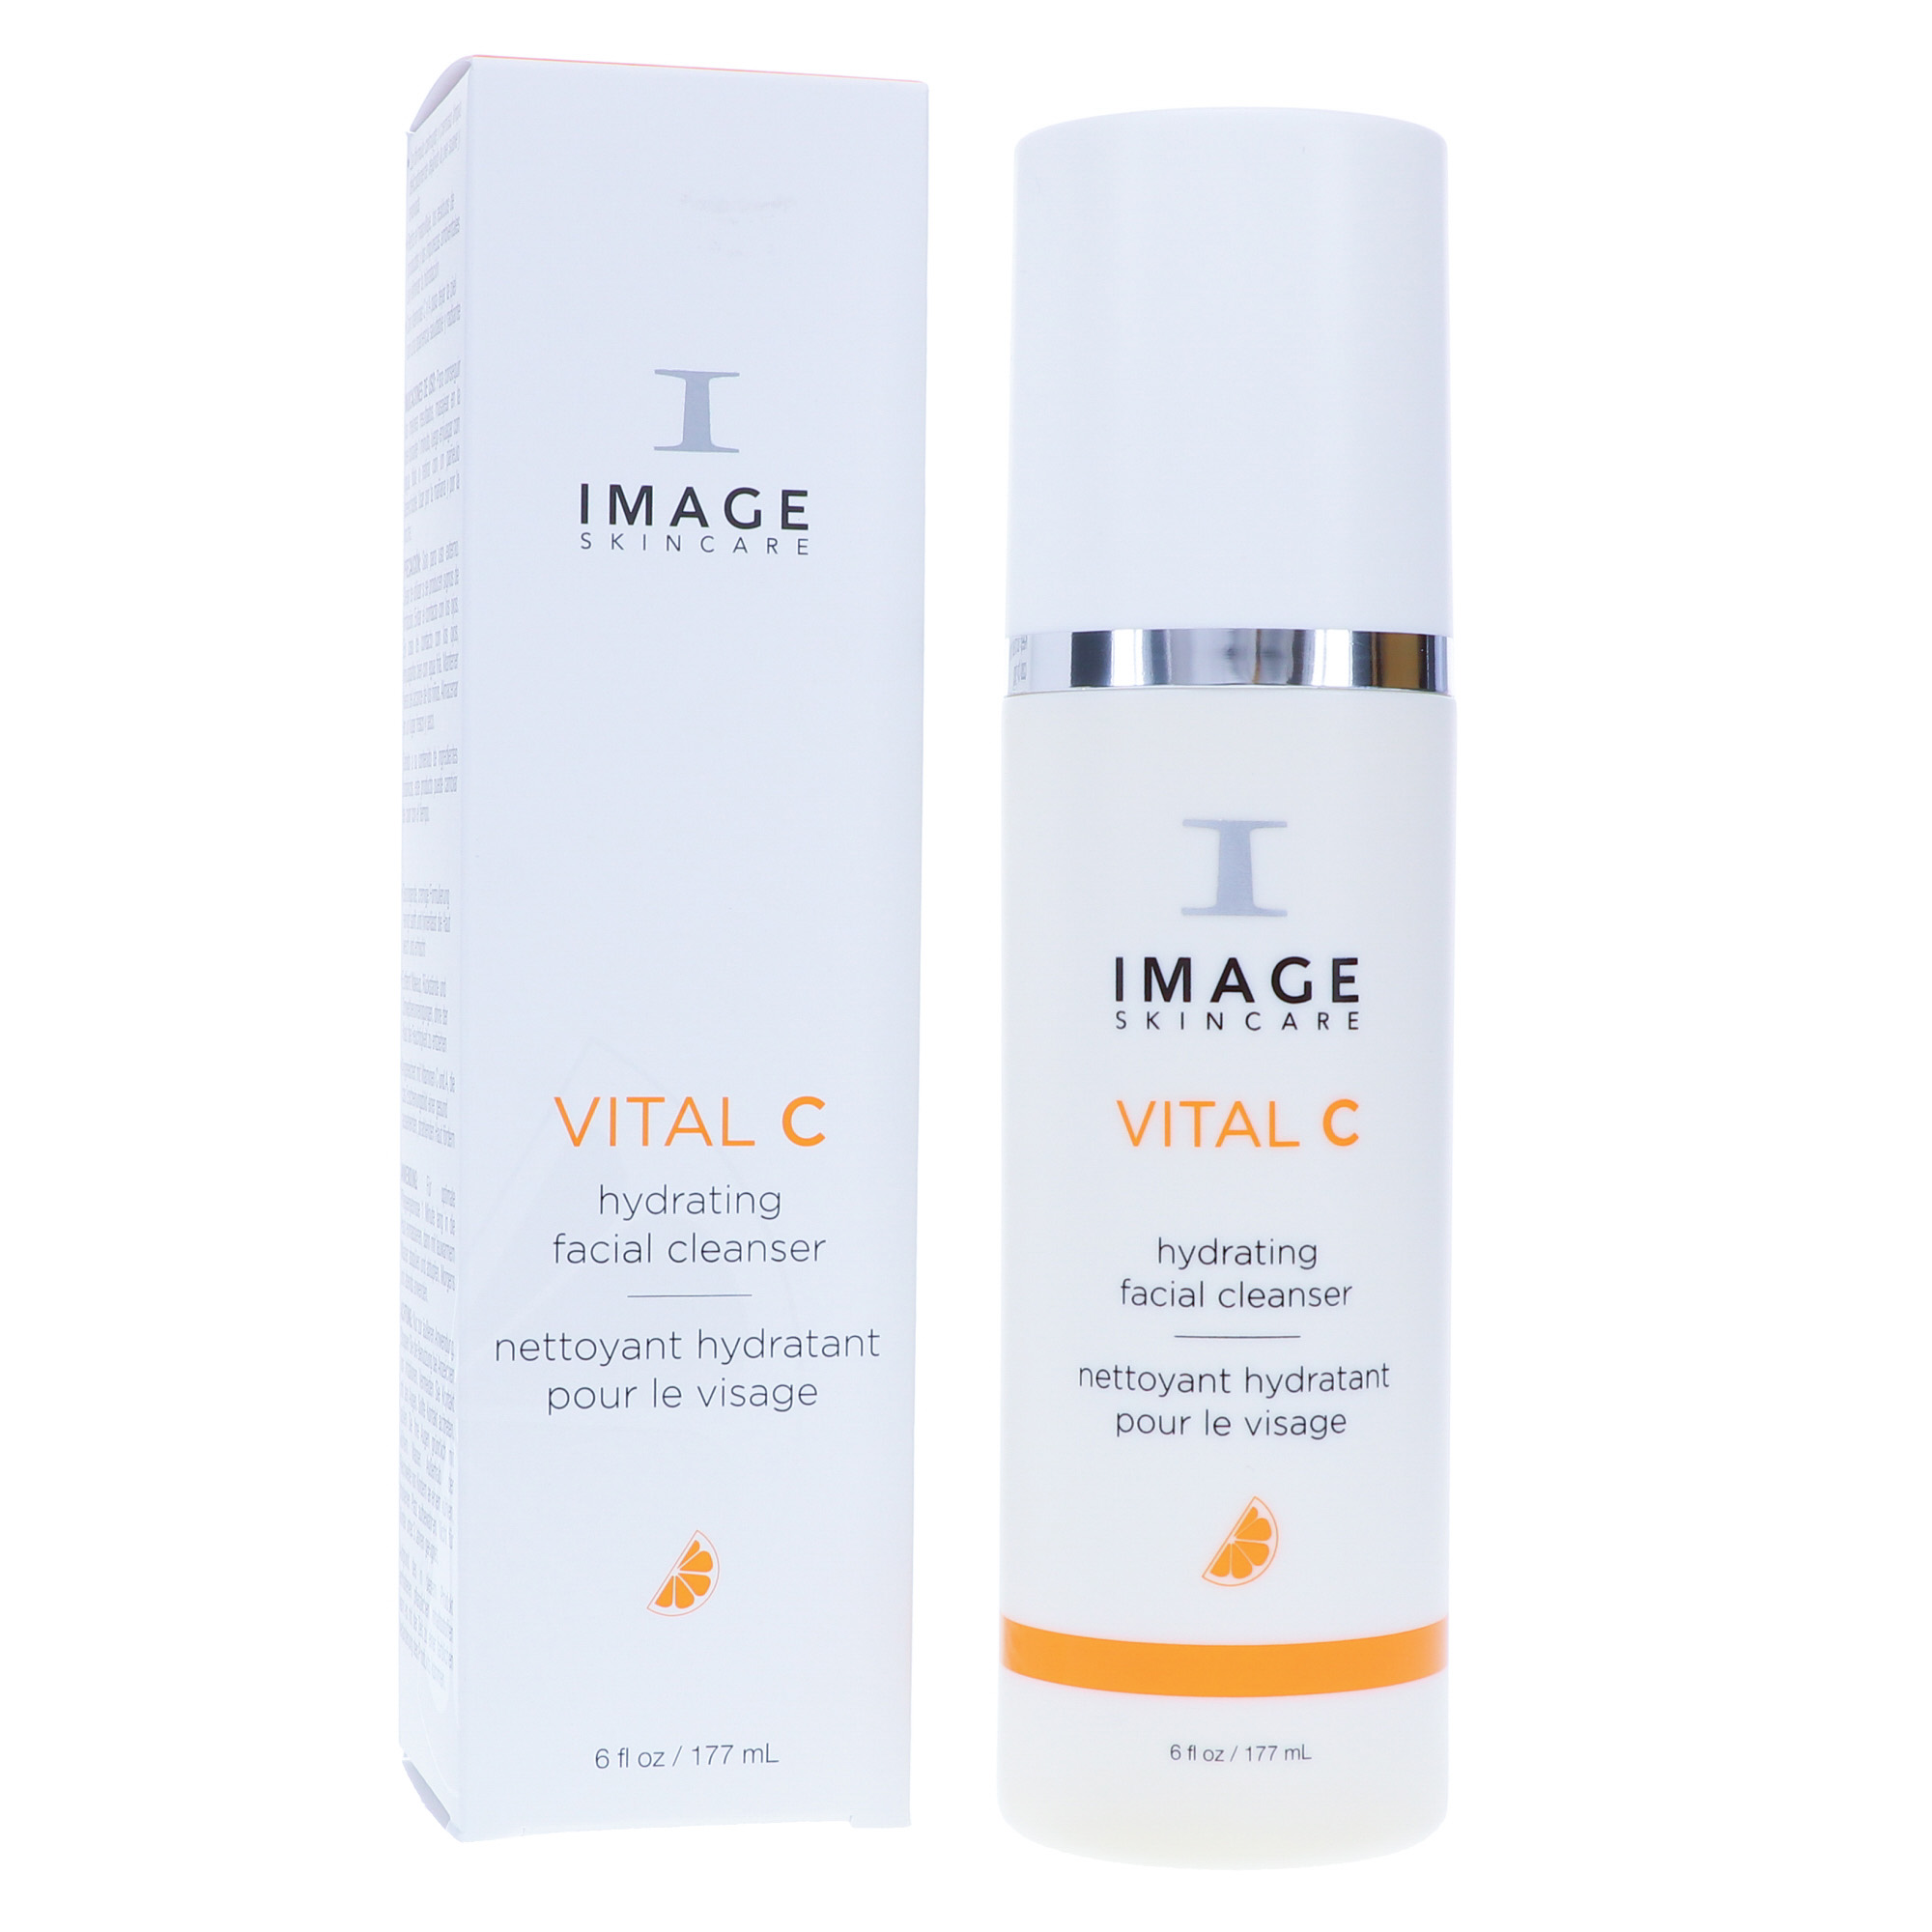 IMAGE Skincare Vital C Hydrating Facial Cleanser 6 oz - image 1 of 9